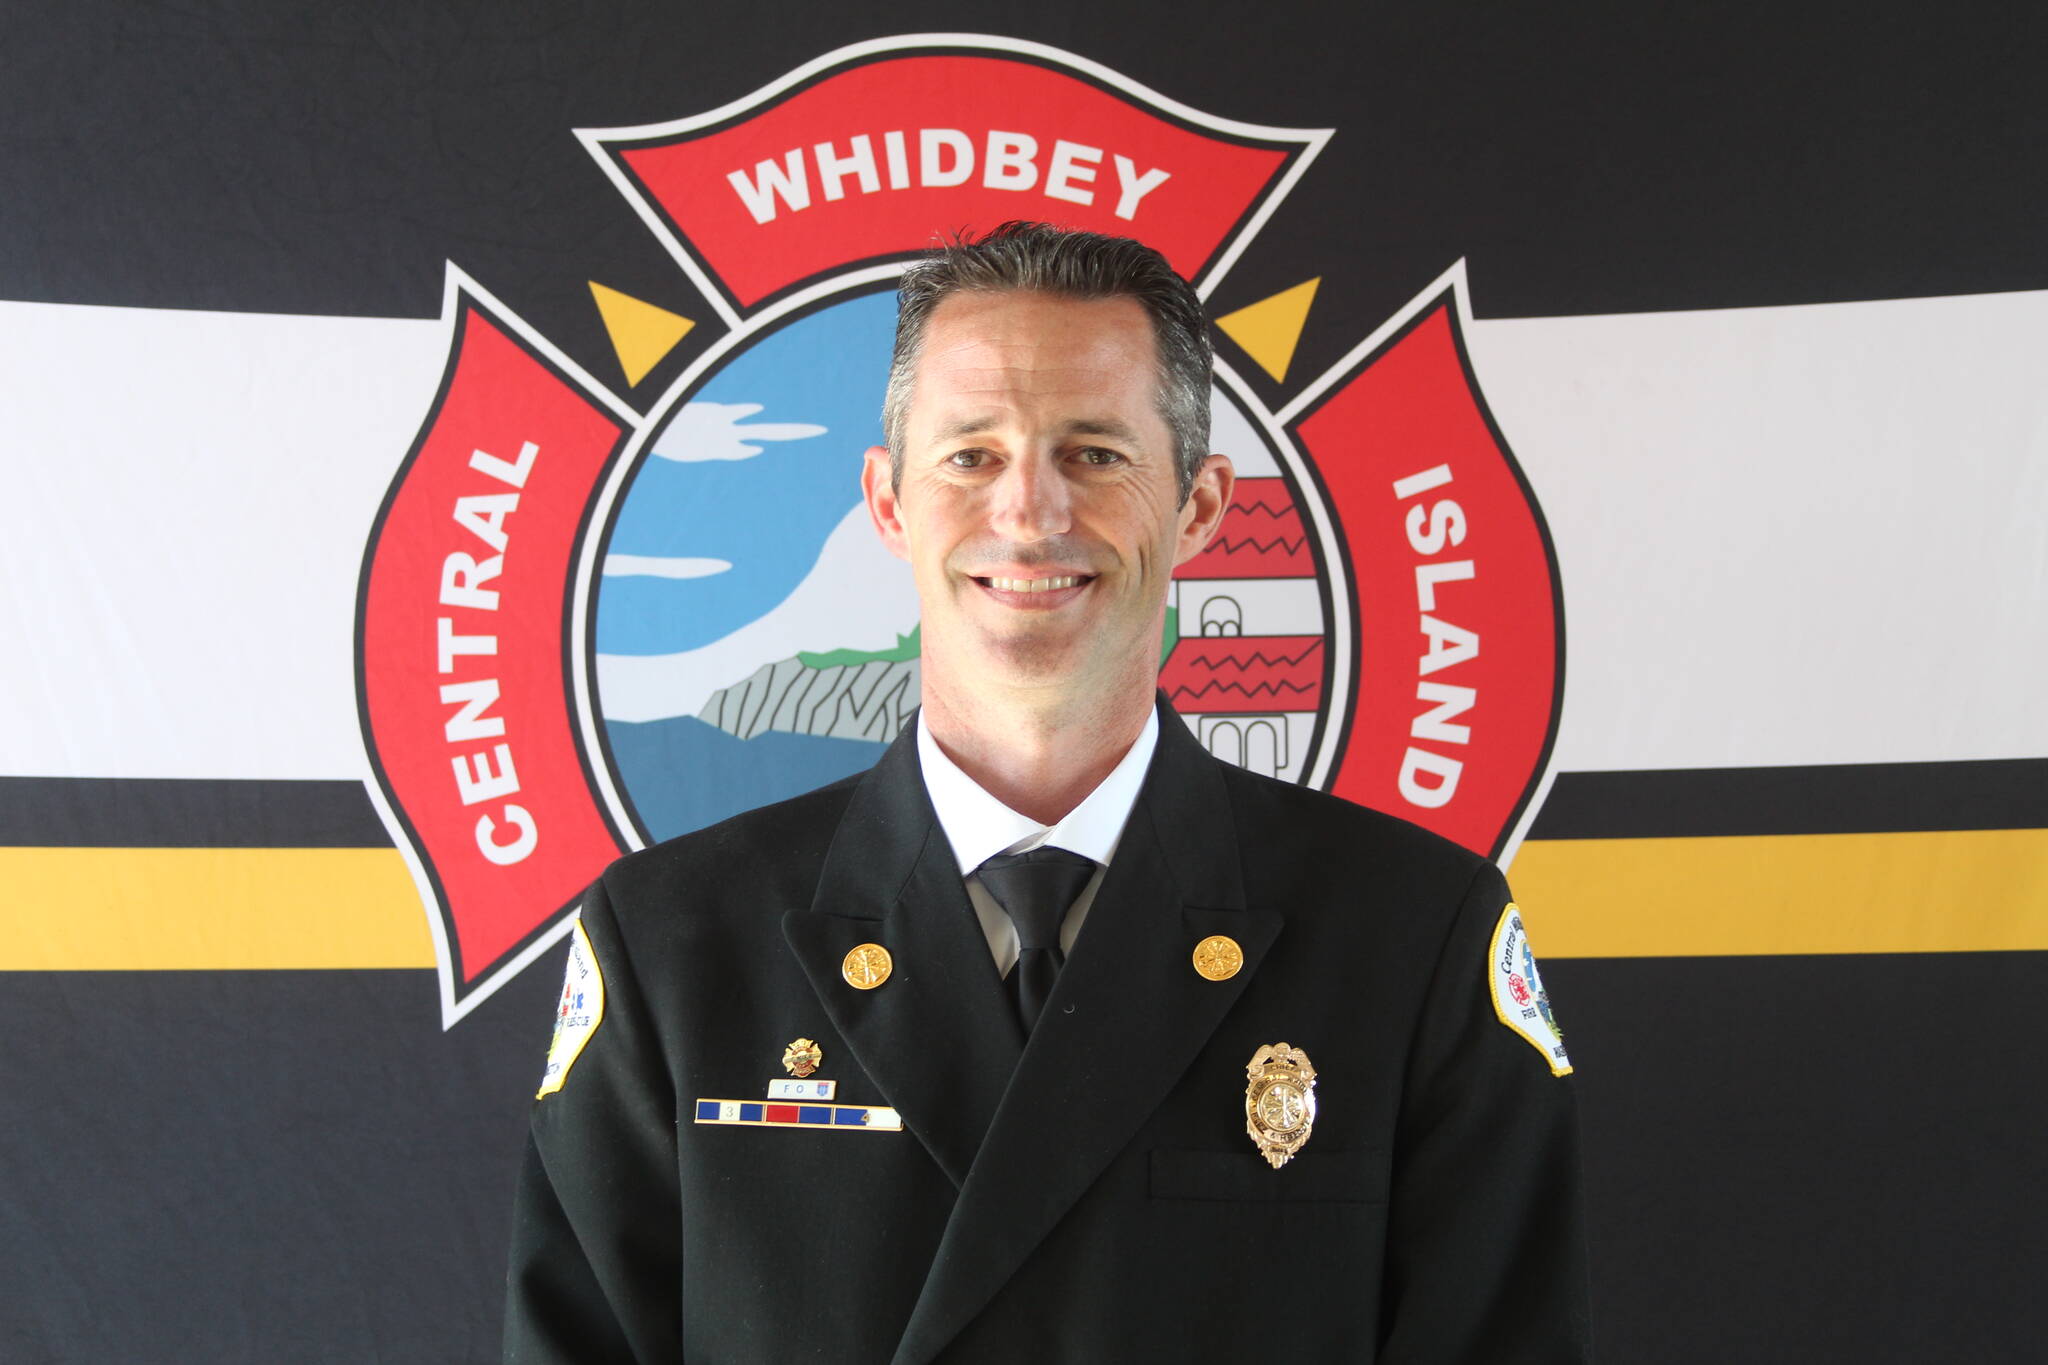 Photo by Karina Andrew/Whidbey News-Times
Longtime Central Whidbey Island Fire and Rescue firefighter Jerry Helm was sworn in as chief for the district at the fire station in Greenbank May 16.